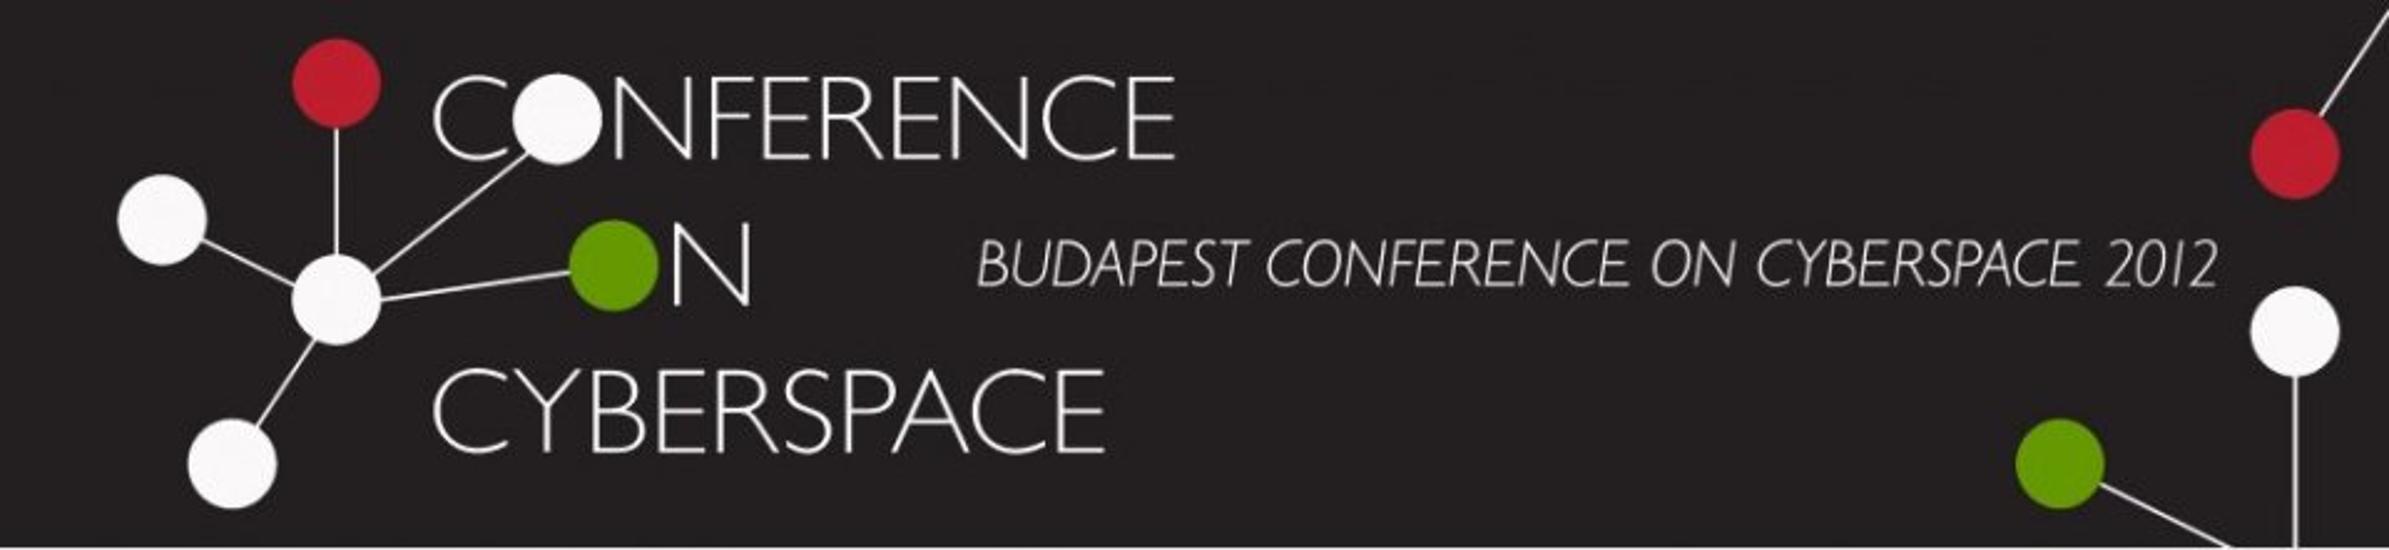 International Cyber Space Conference In Budapest With High-Ranking Politicians